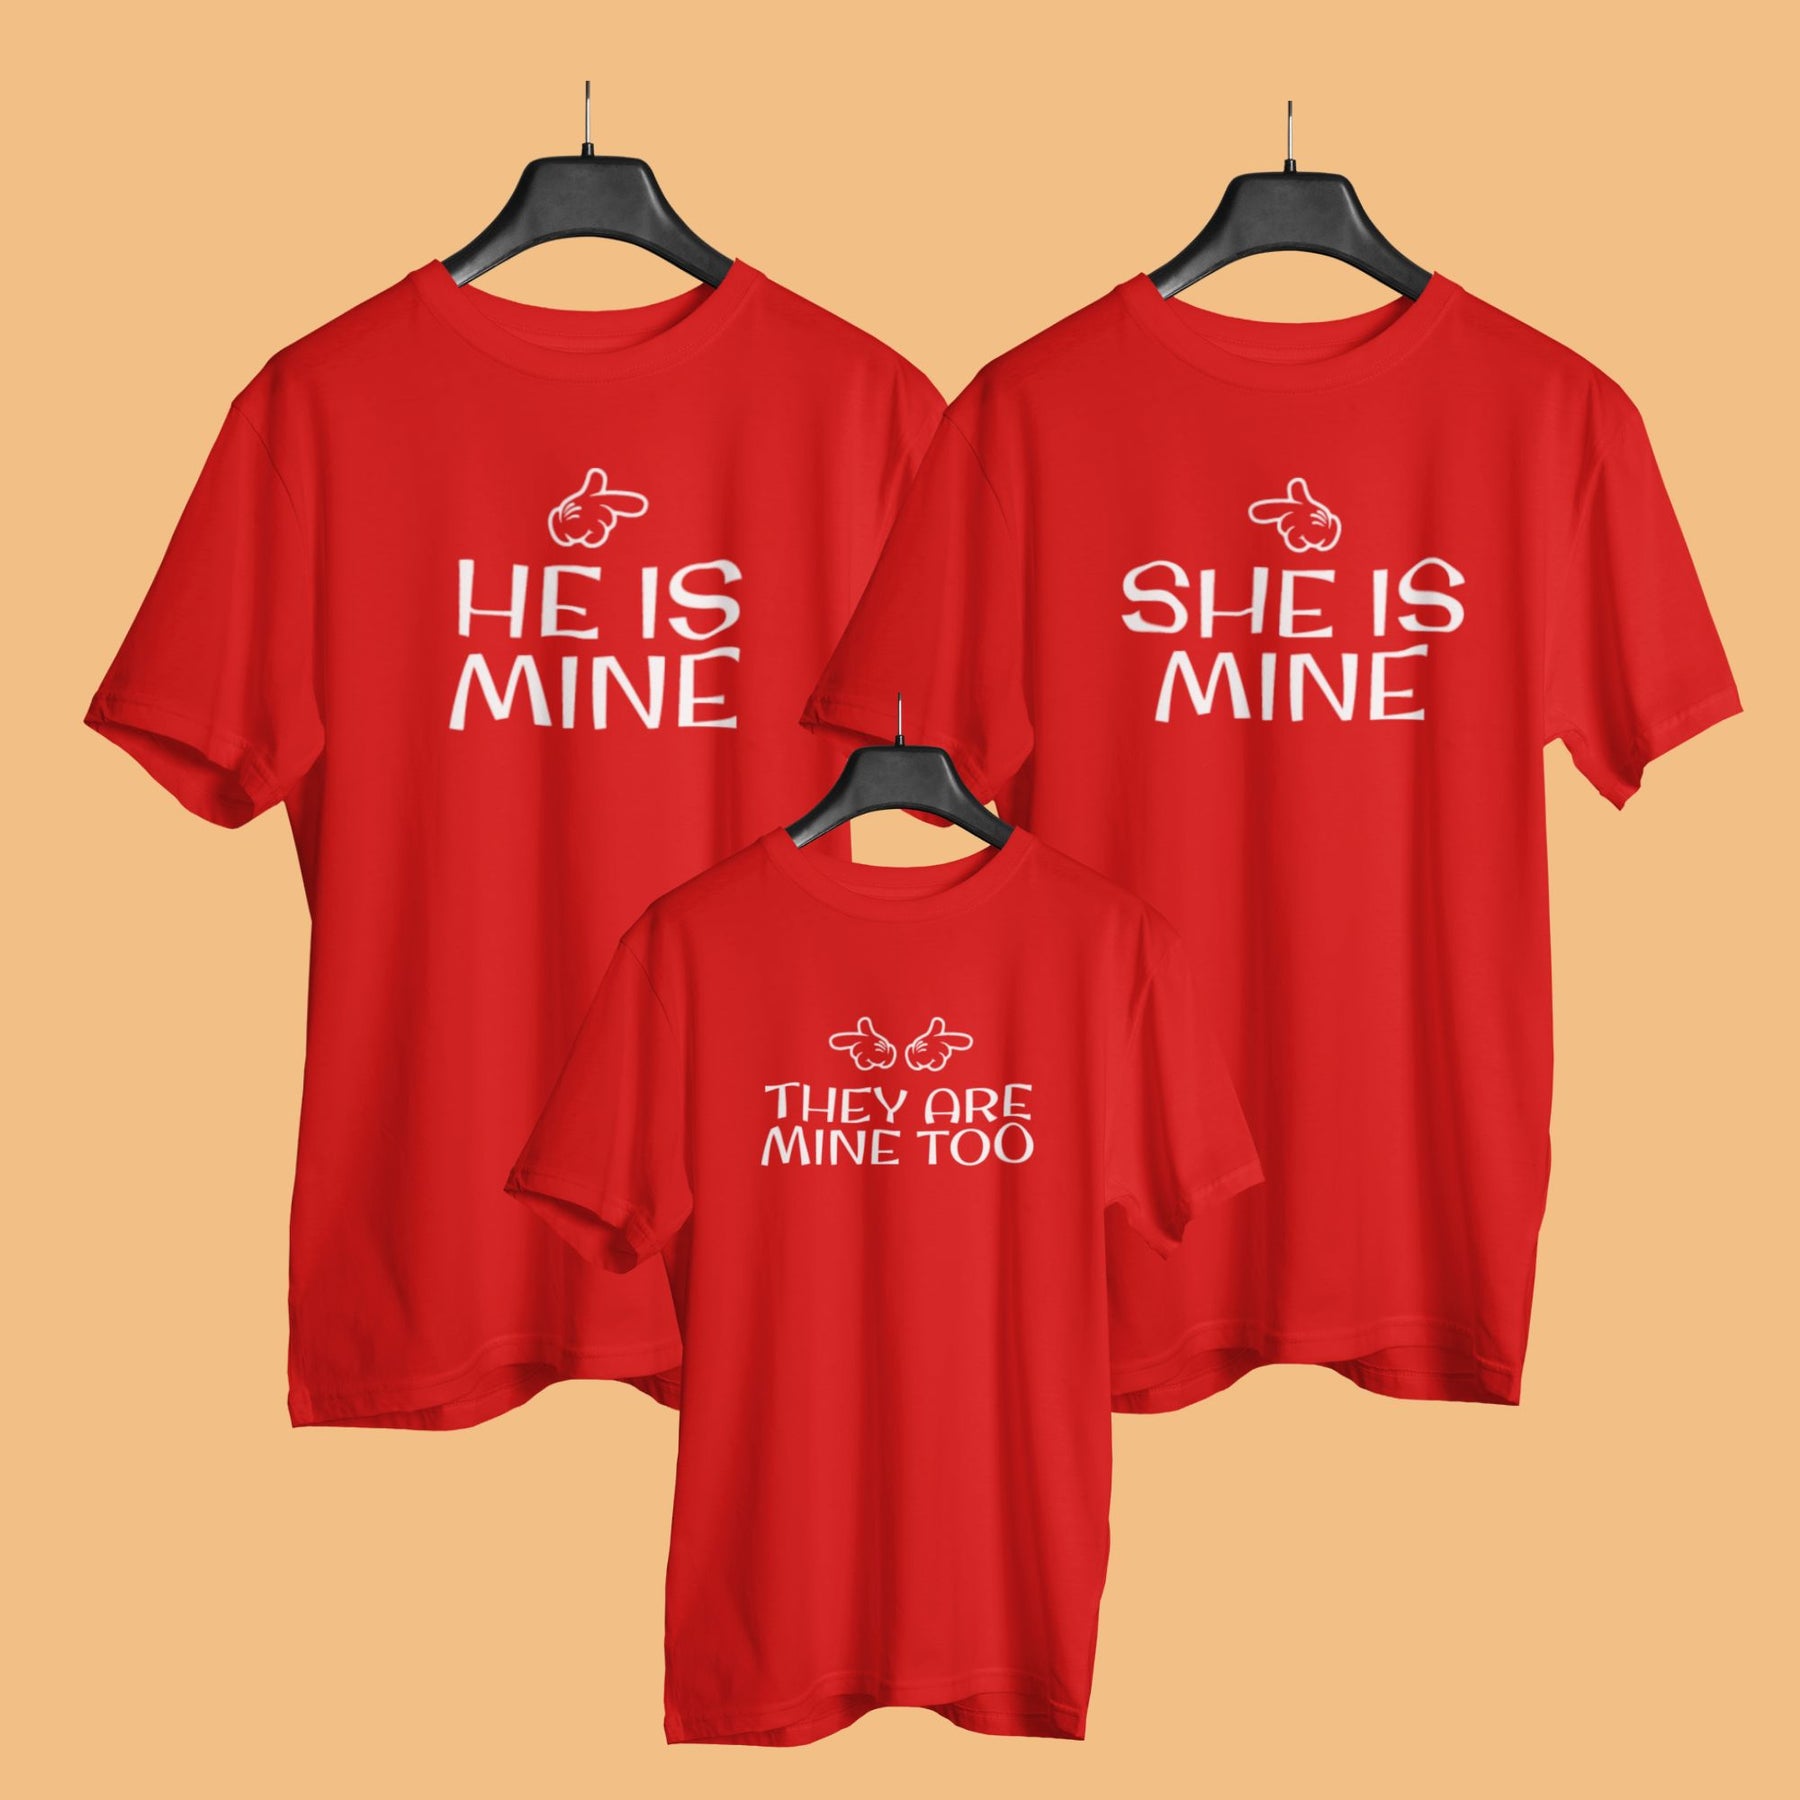 he-is-mine-matching-family-red-t-shirts-for-mom-dad-son-daughter-gogirgit-hanger